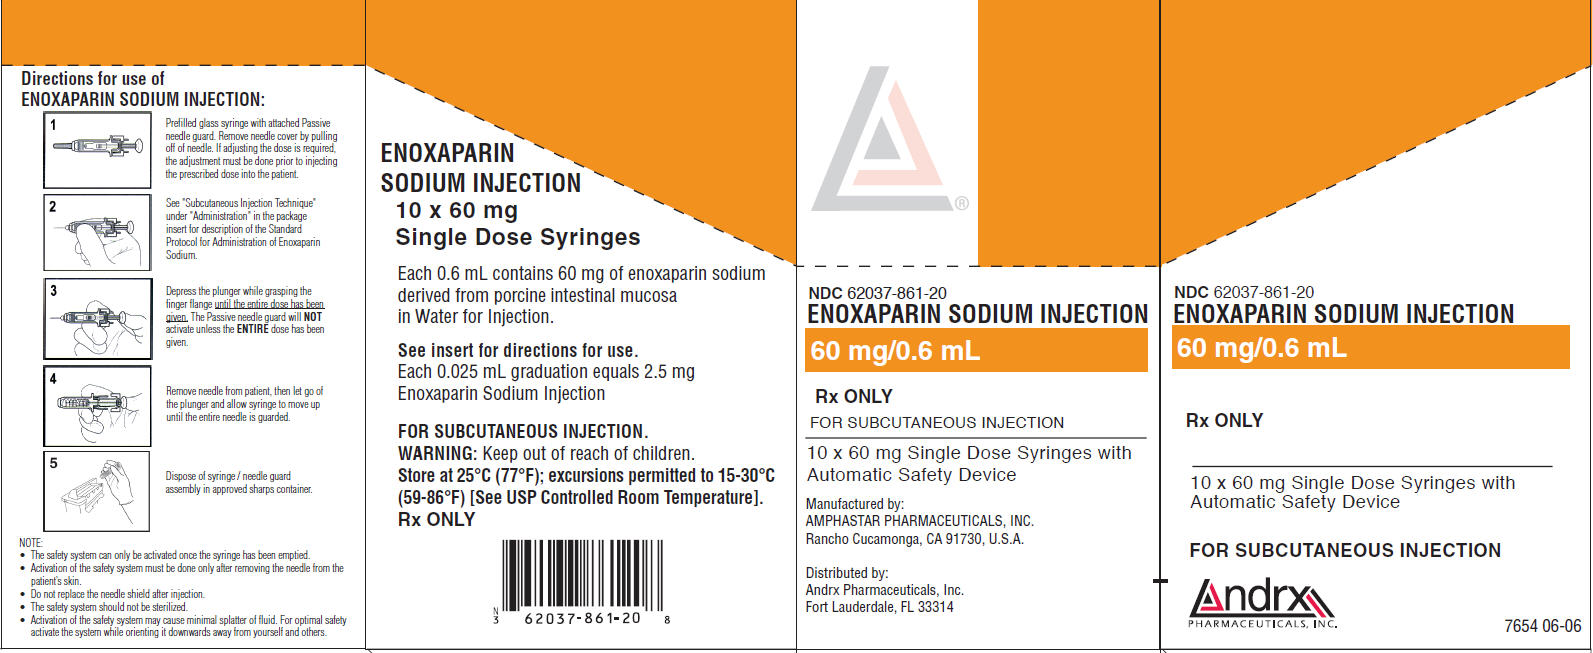 NDC 62037-861-20 ENOXAPARIN SODIUM INJECTION 60 mg/0.6 mL Rx ONLY FOR SUBCUTANEOUS INJECTION 10 x 60 mg Single Dose Syringes with Automatic Safety Device